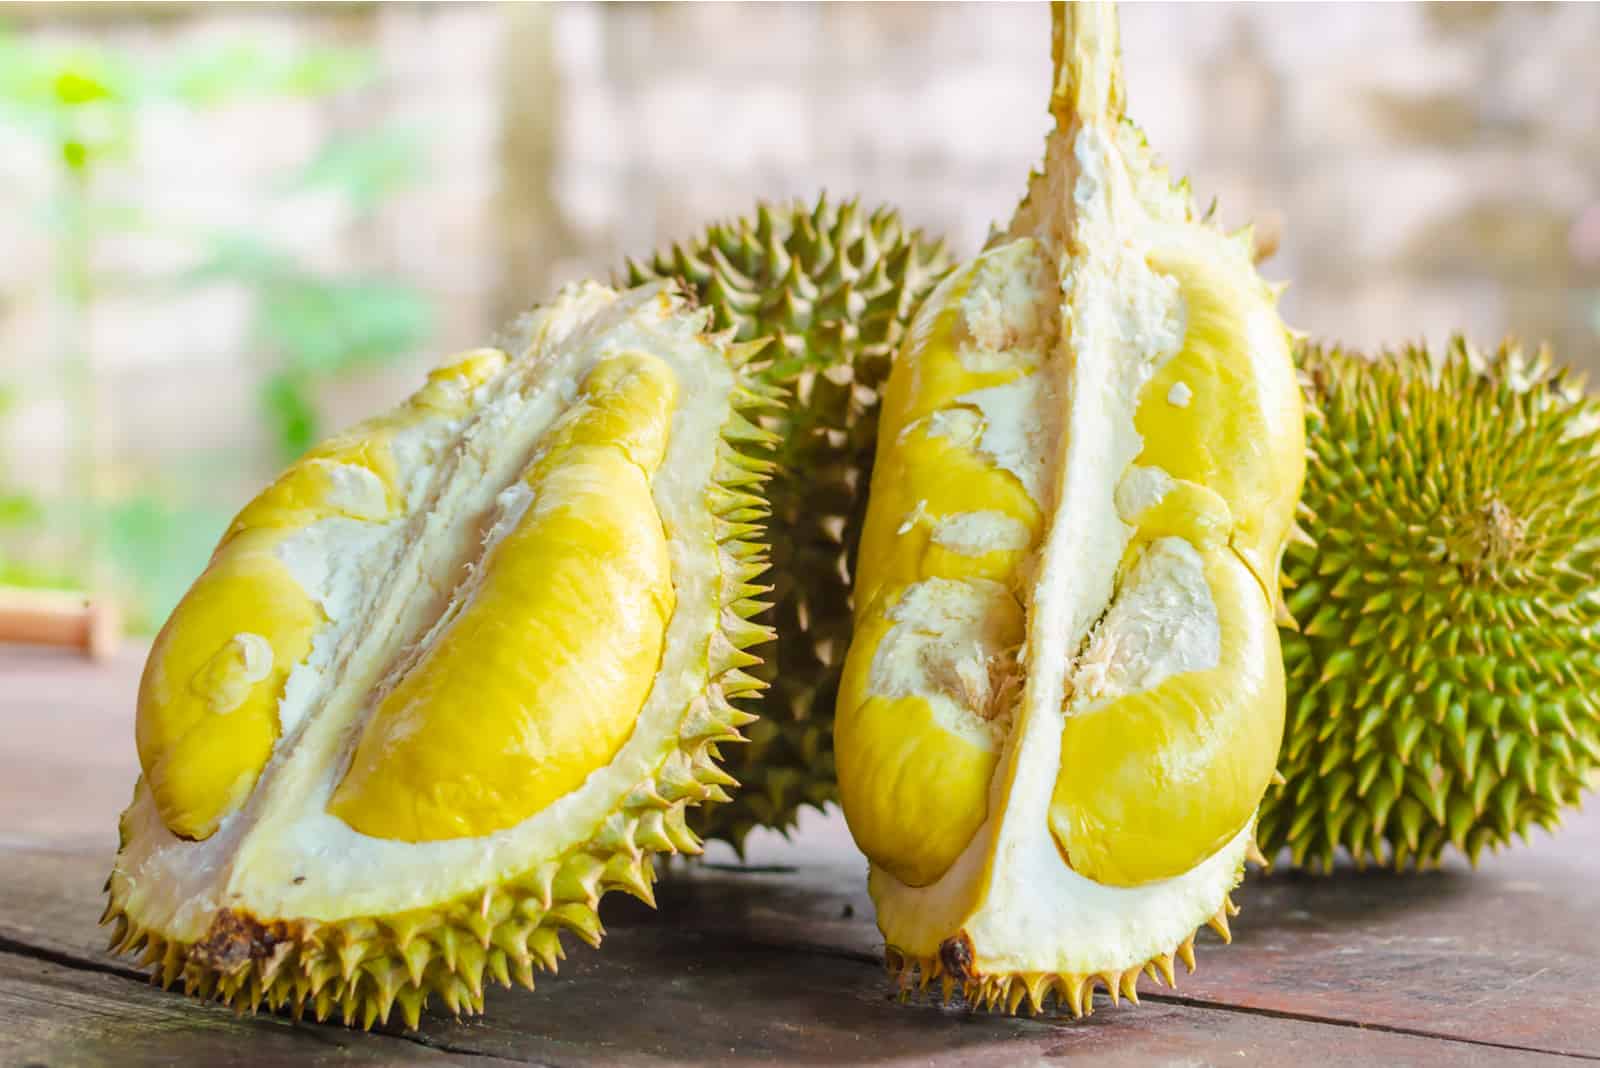 Durian riped and fresh on wooden table